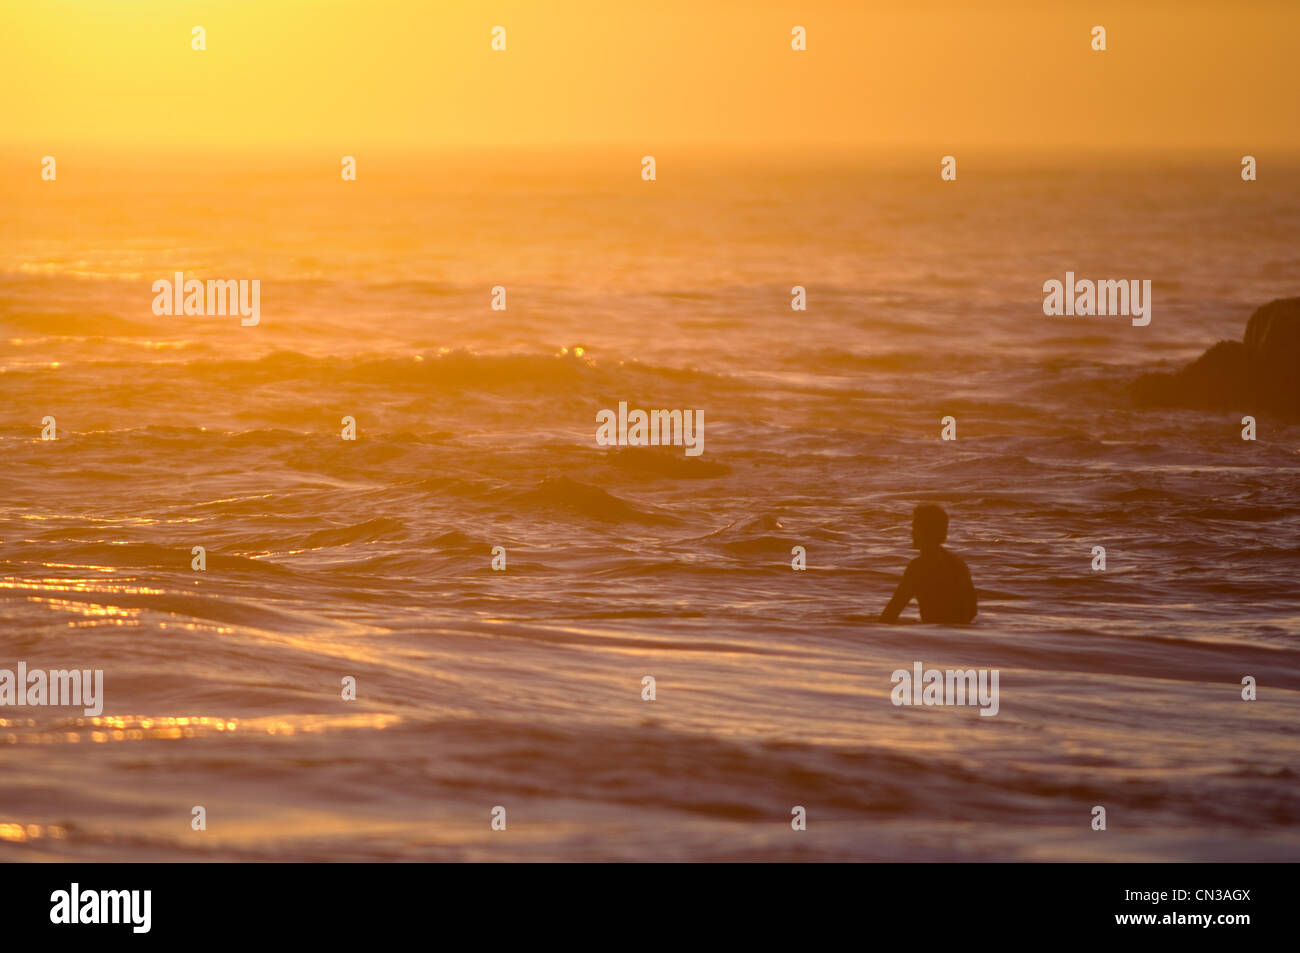 Surfer in sea at sunset Stock Photo